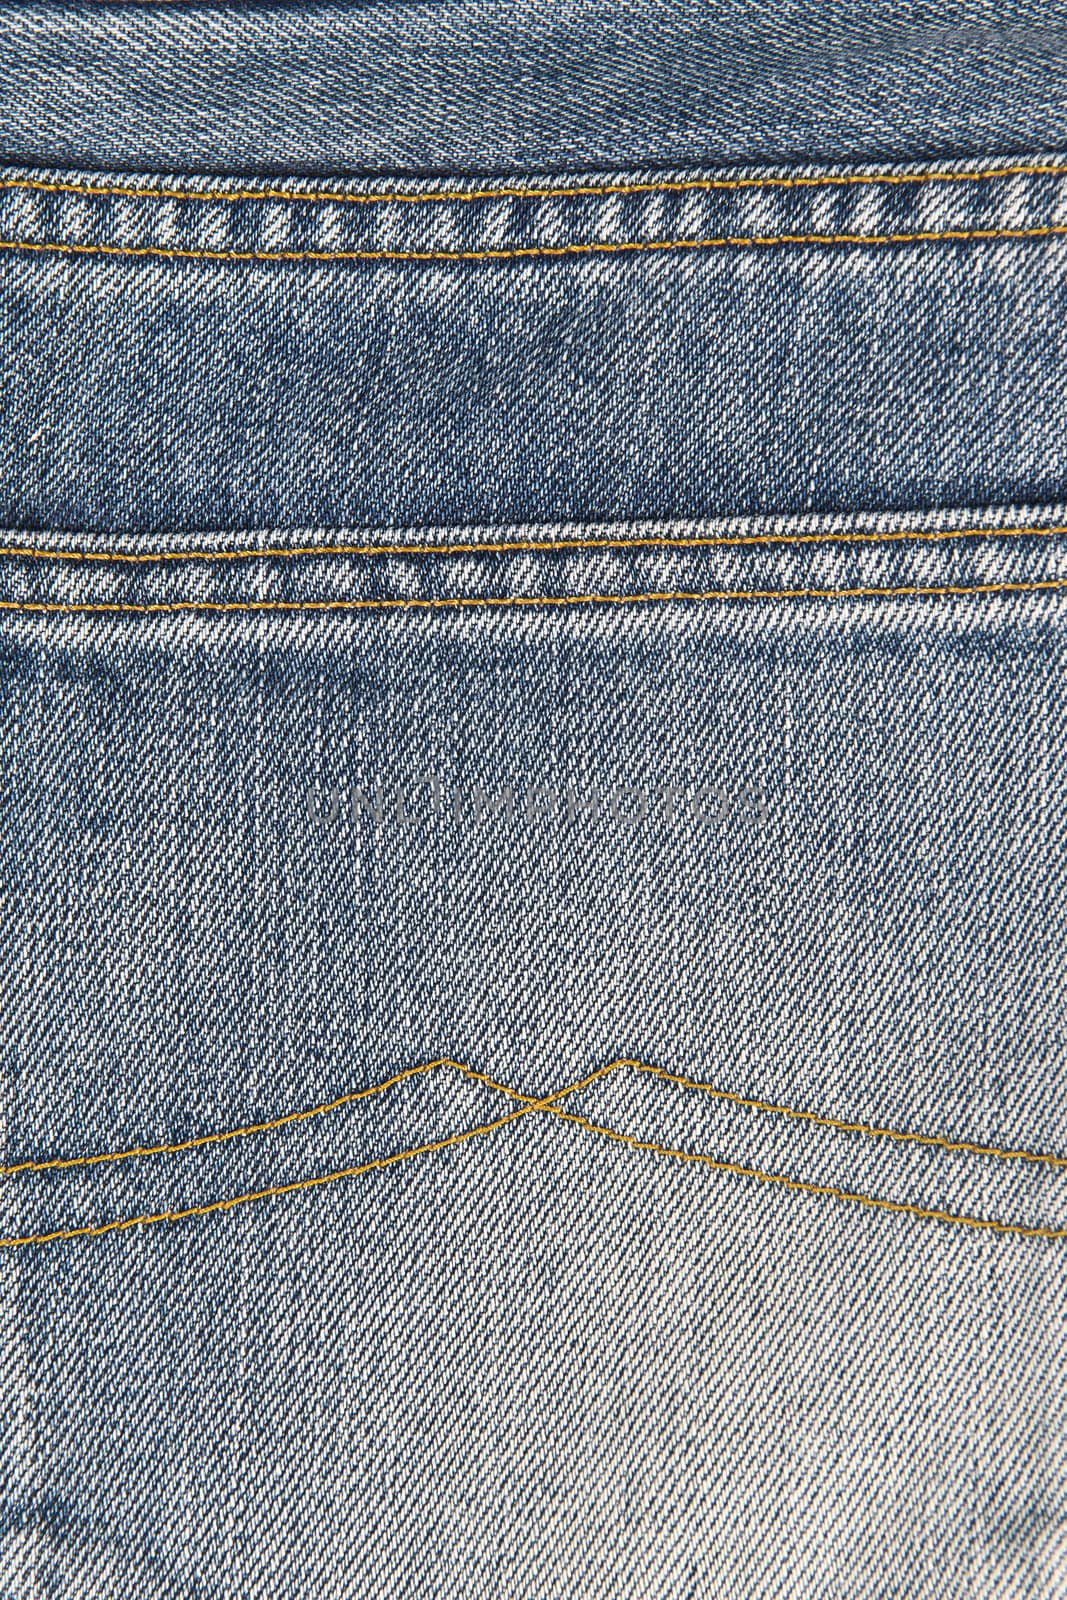 Detail of the classic seams in old blue jeans